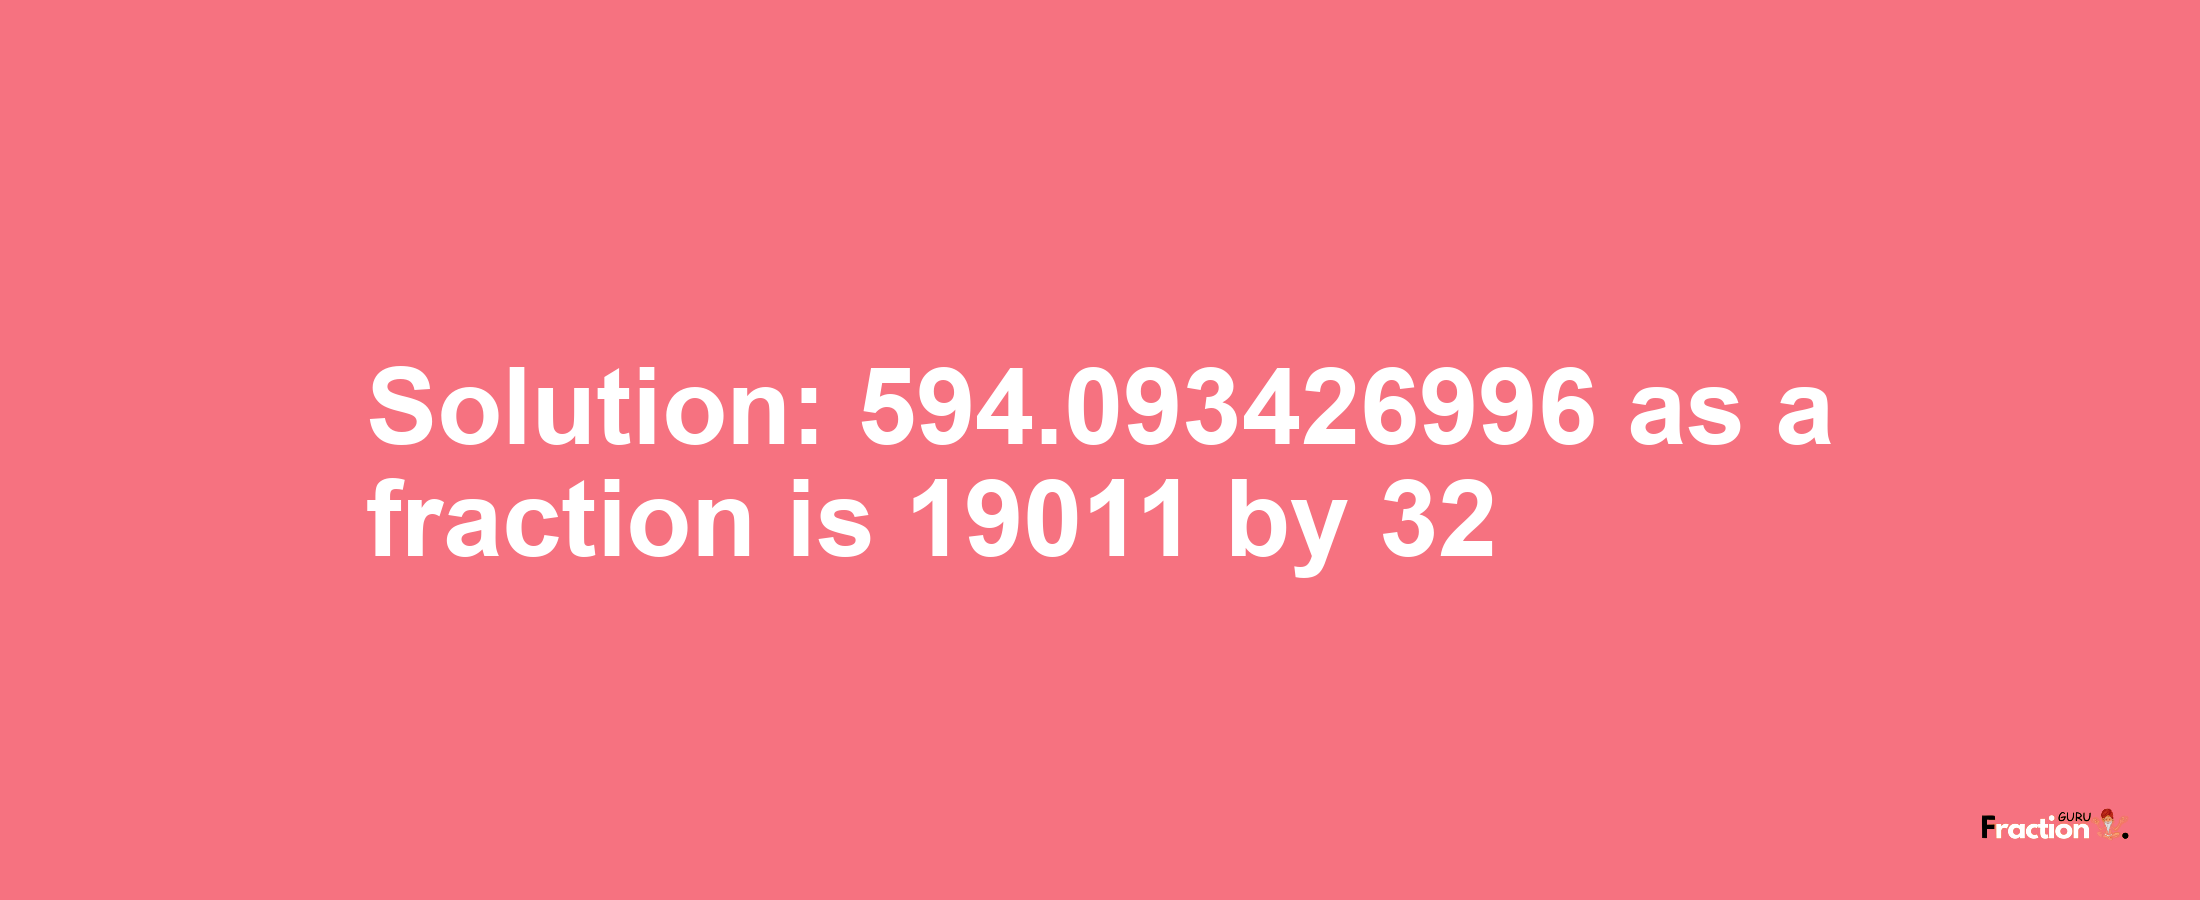 Solution:594.093426996 as a fraction is 19011/32